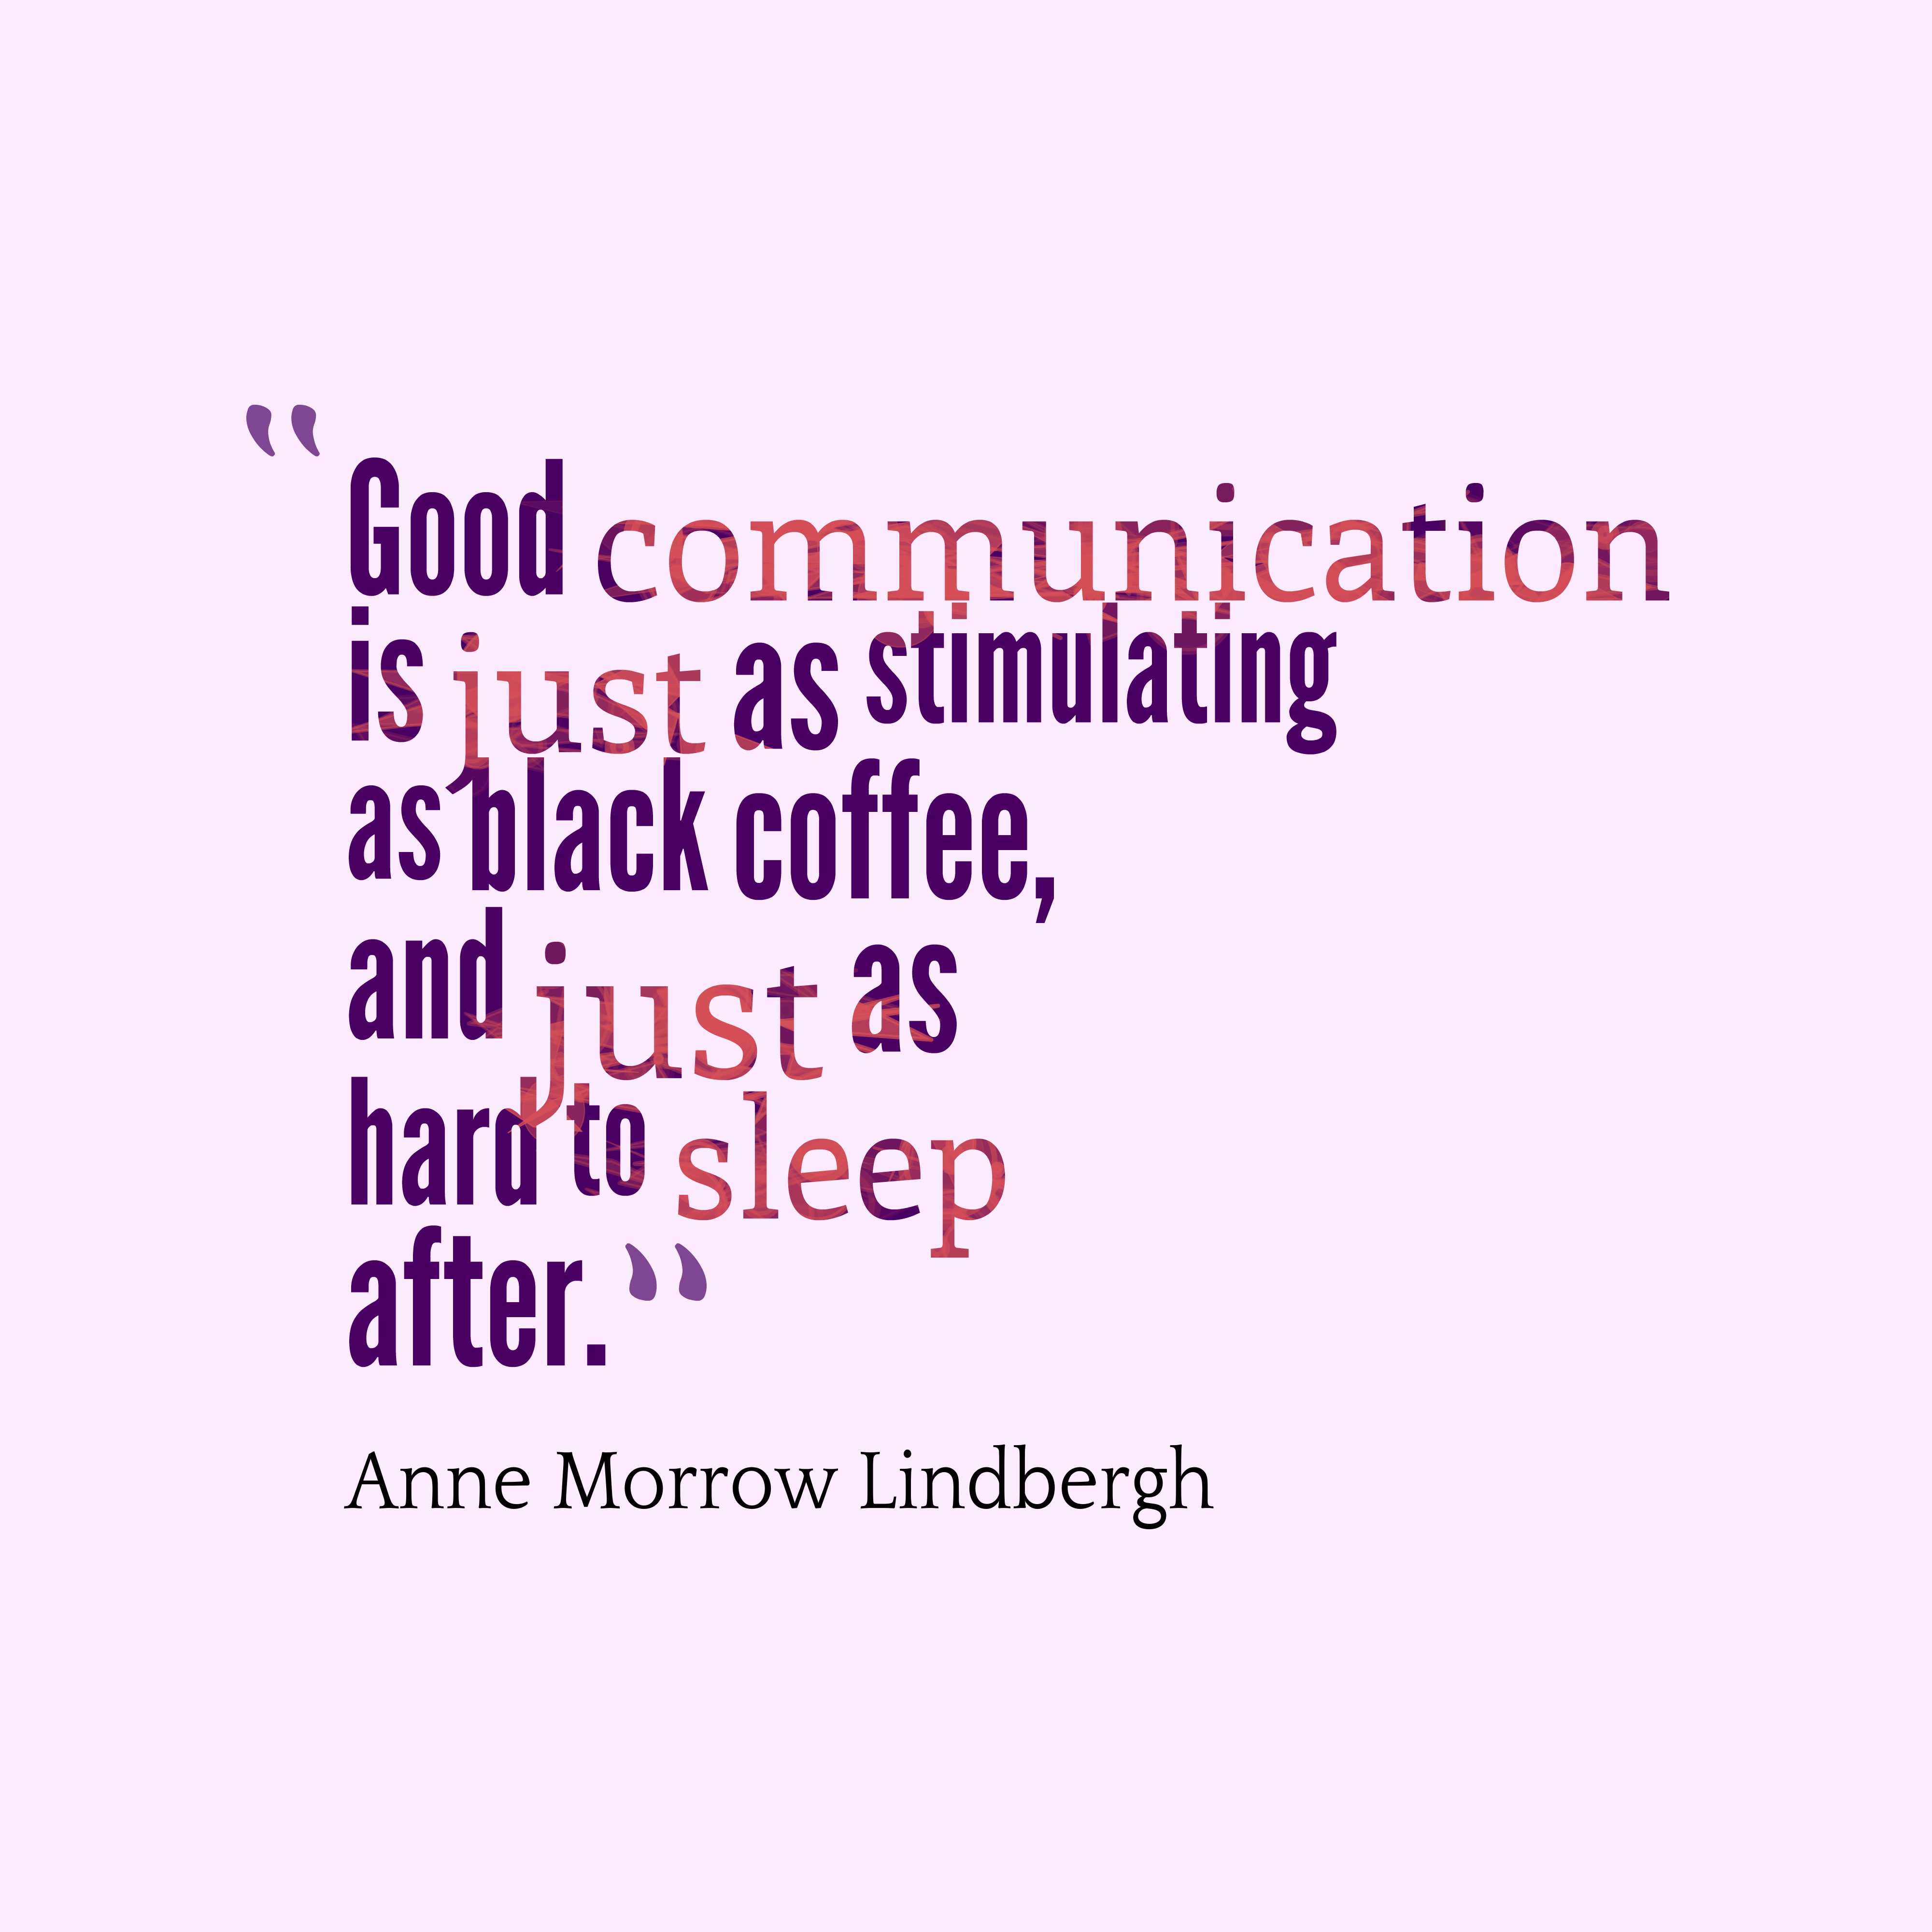 Good communication is just as stimulating as black coffee and just as hard to sleep after – Anne Morrow Lindbergh